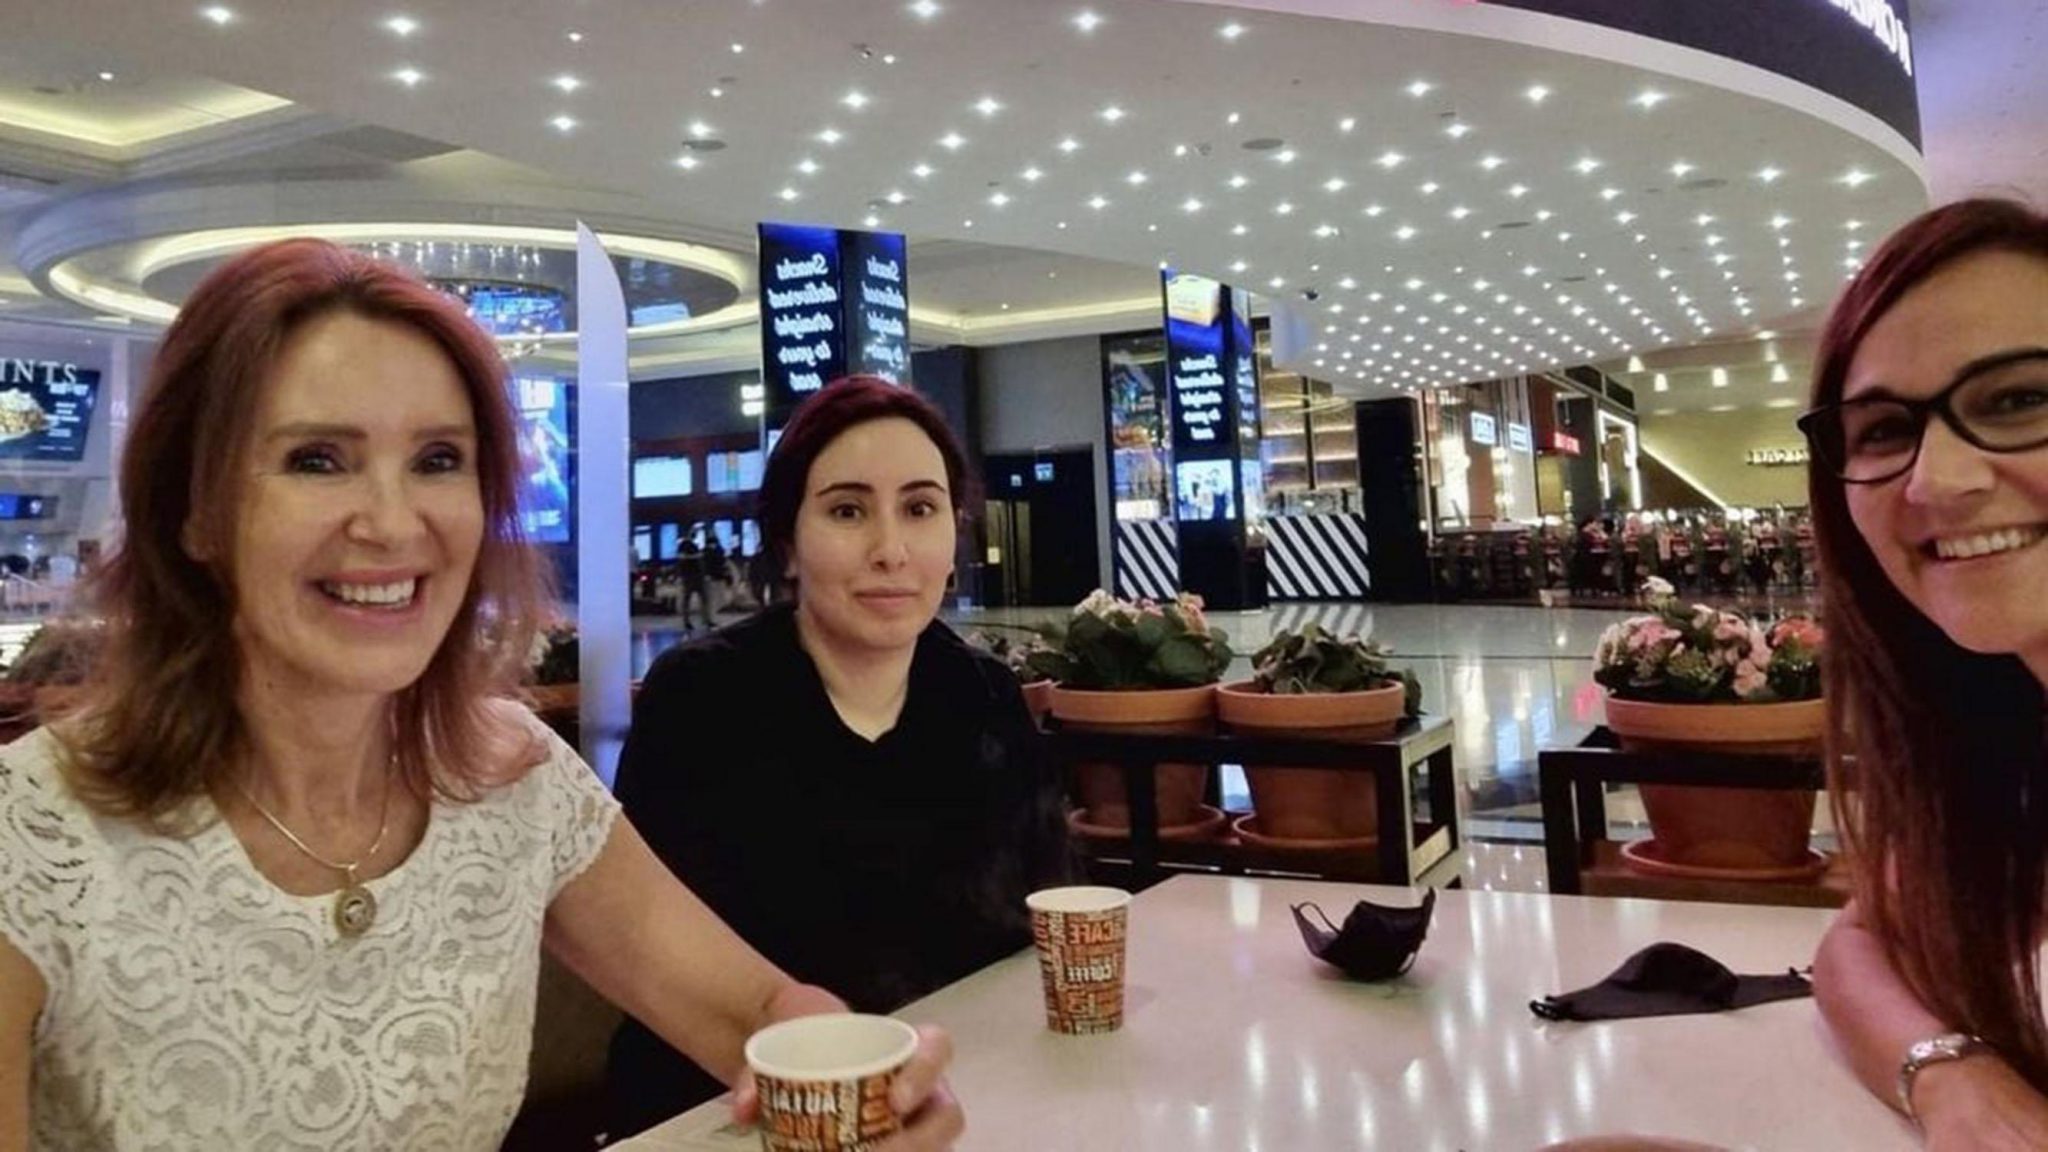 New photo shows missing Dubai princess with friends